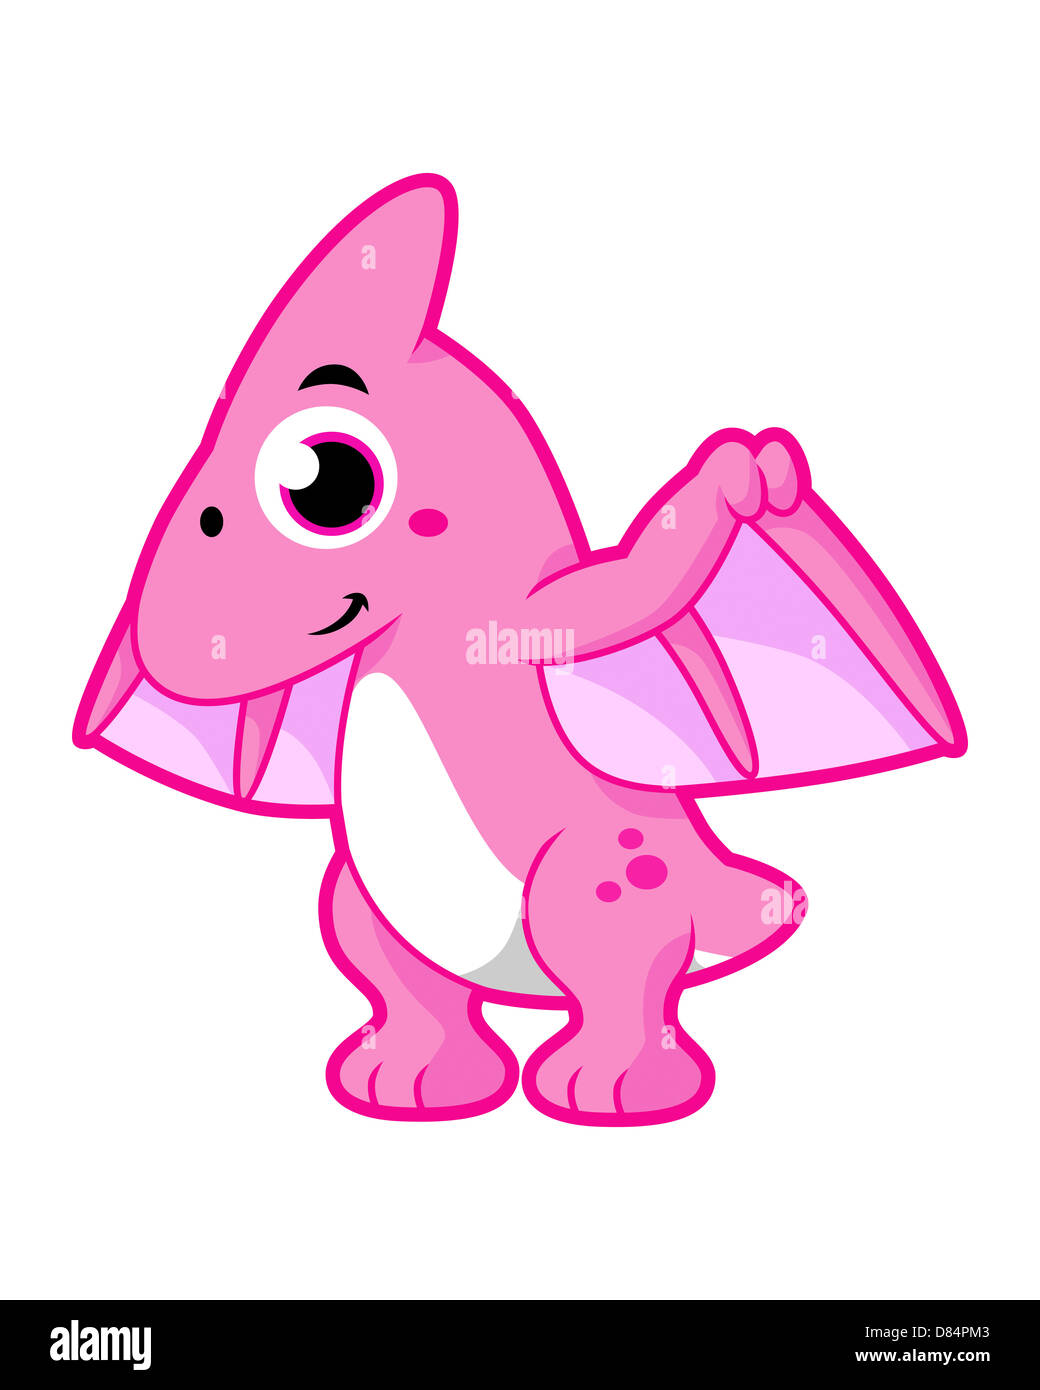 Cute illustration of a pterodactyl. Stock Photo